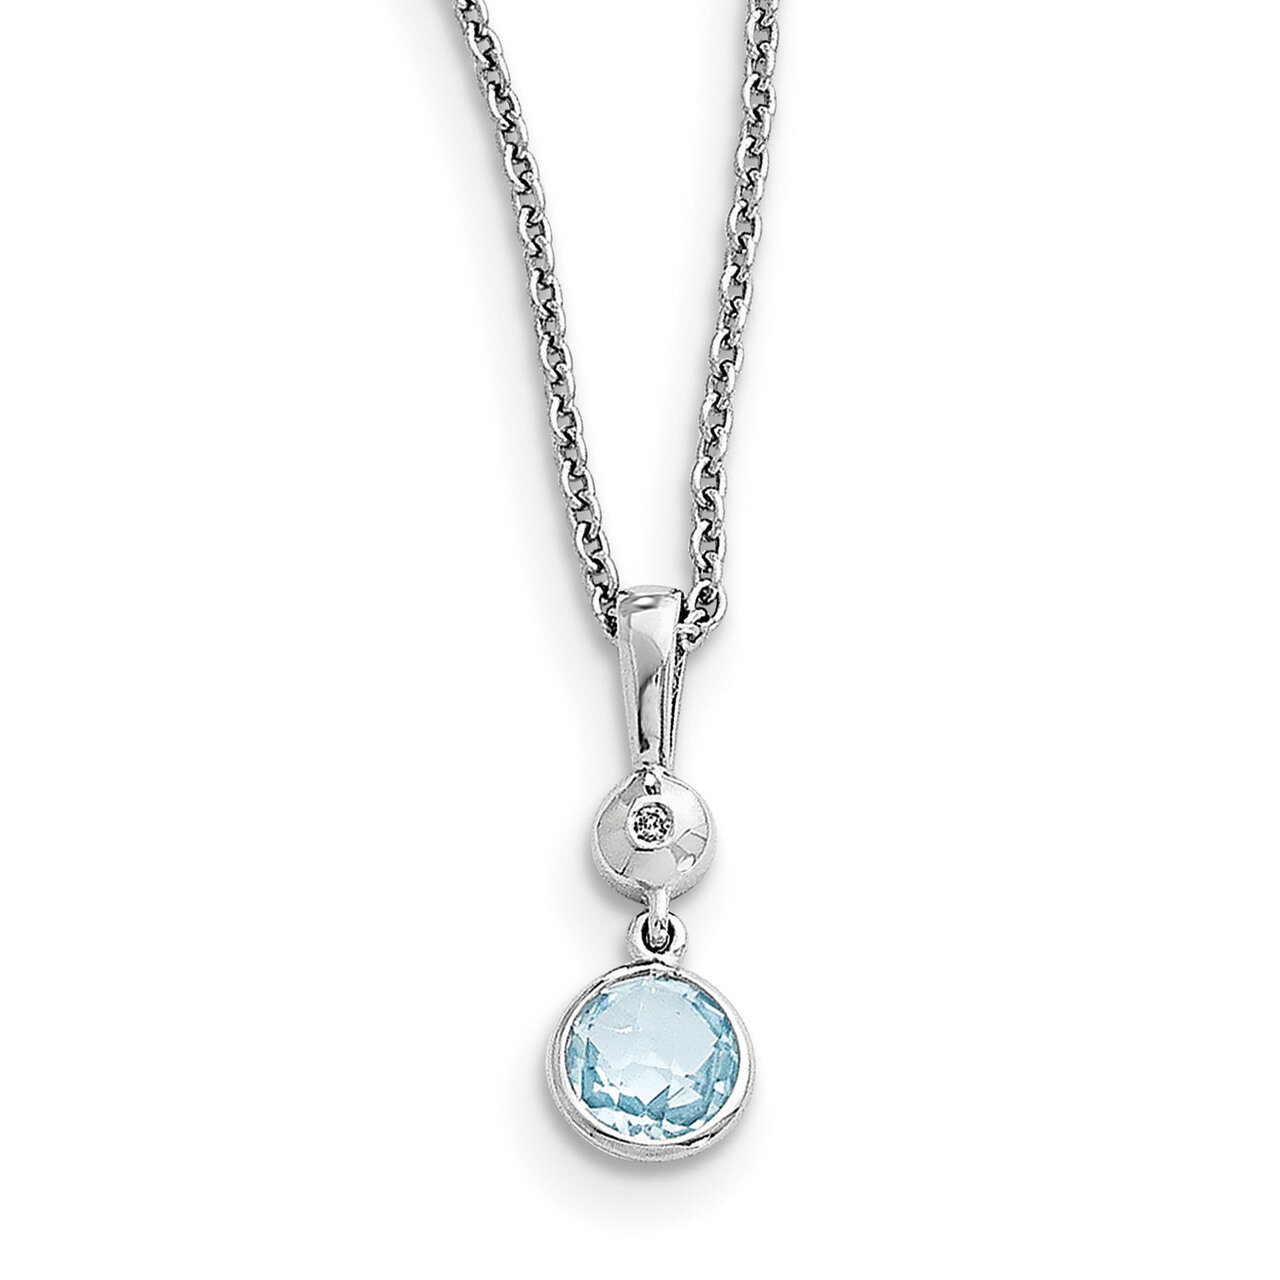 Blue Topaz and Diamond Necklace Sterling Silver QW359-18